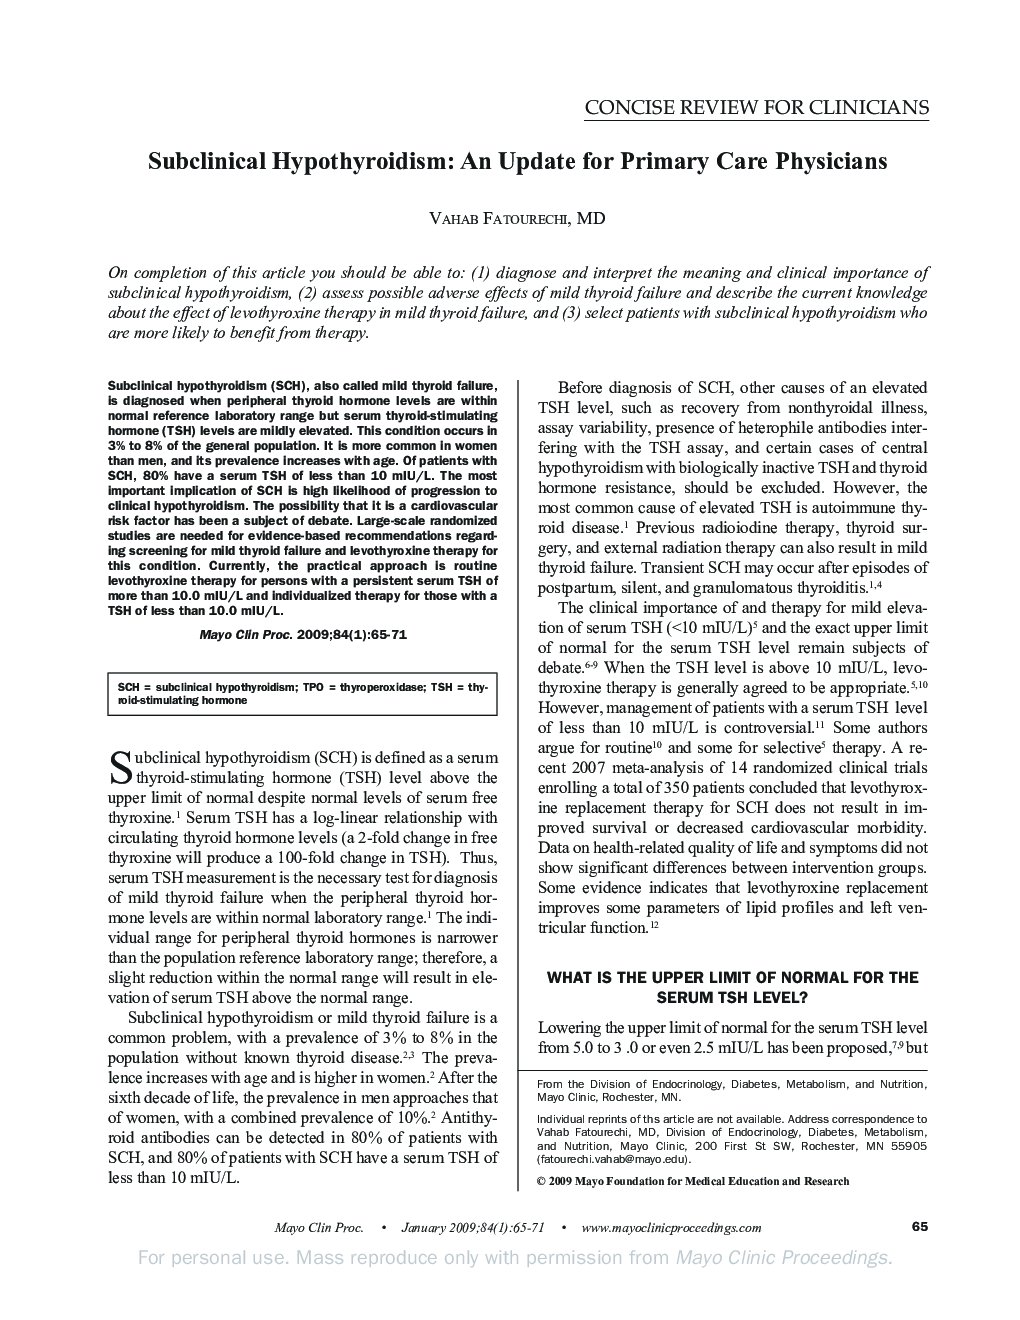 Subclinical Hypothyroidism: An Update for Primary Care Physicians